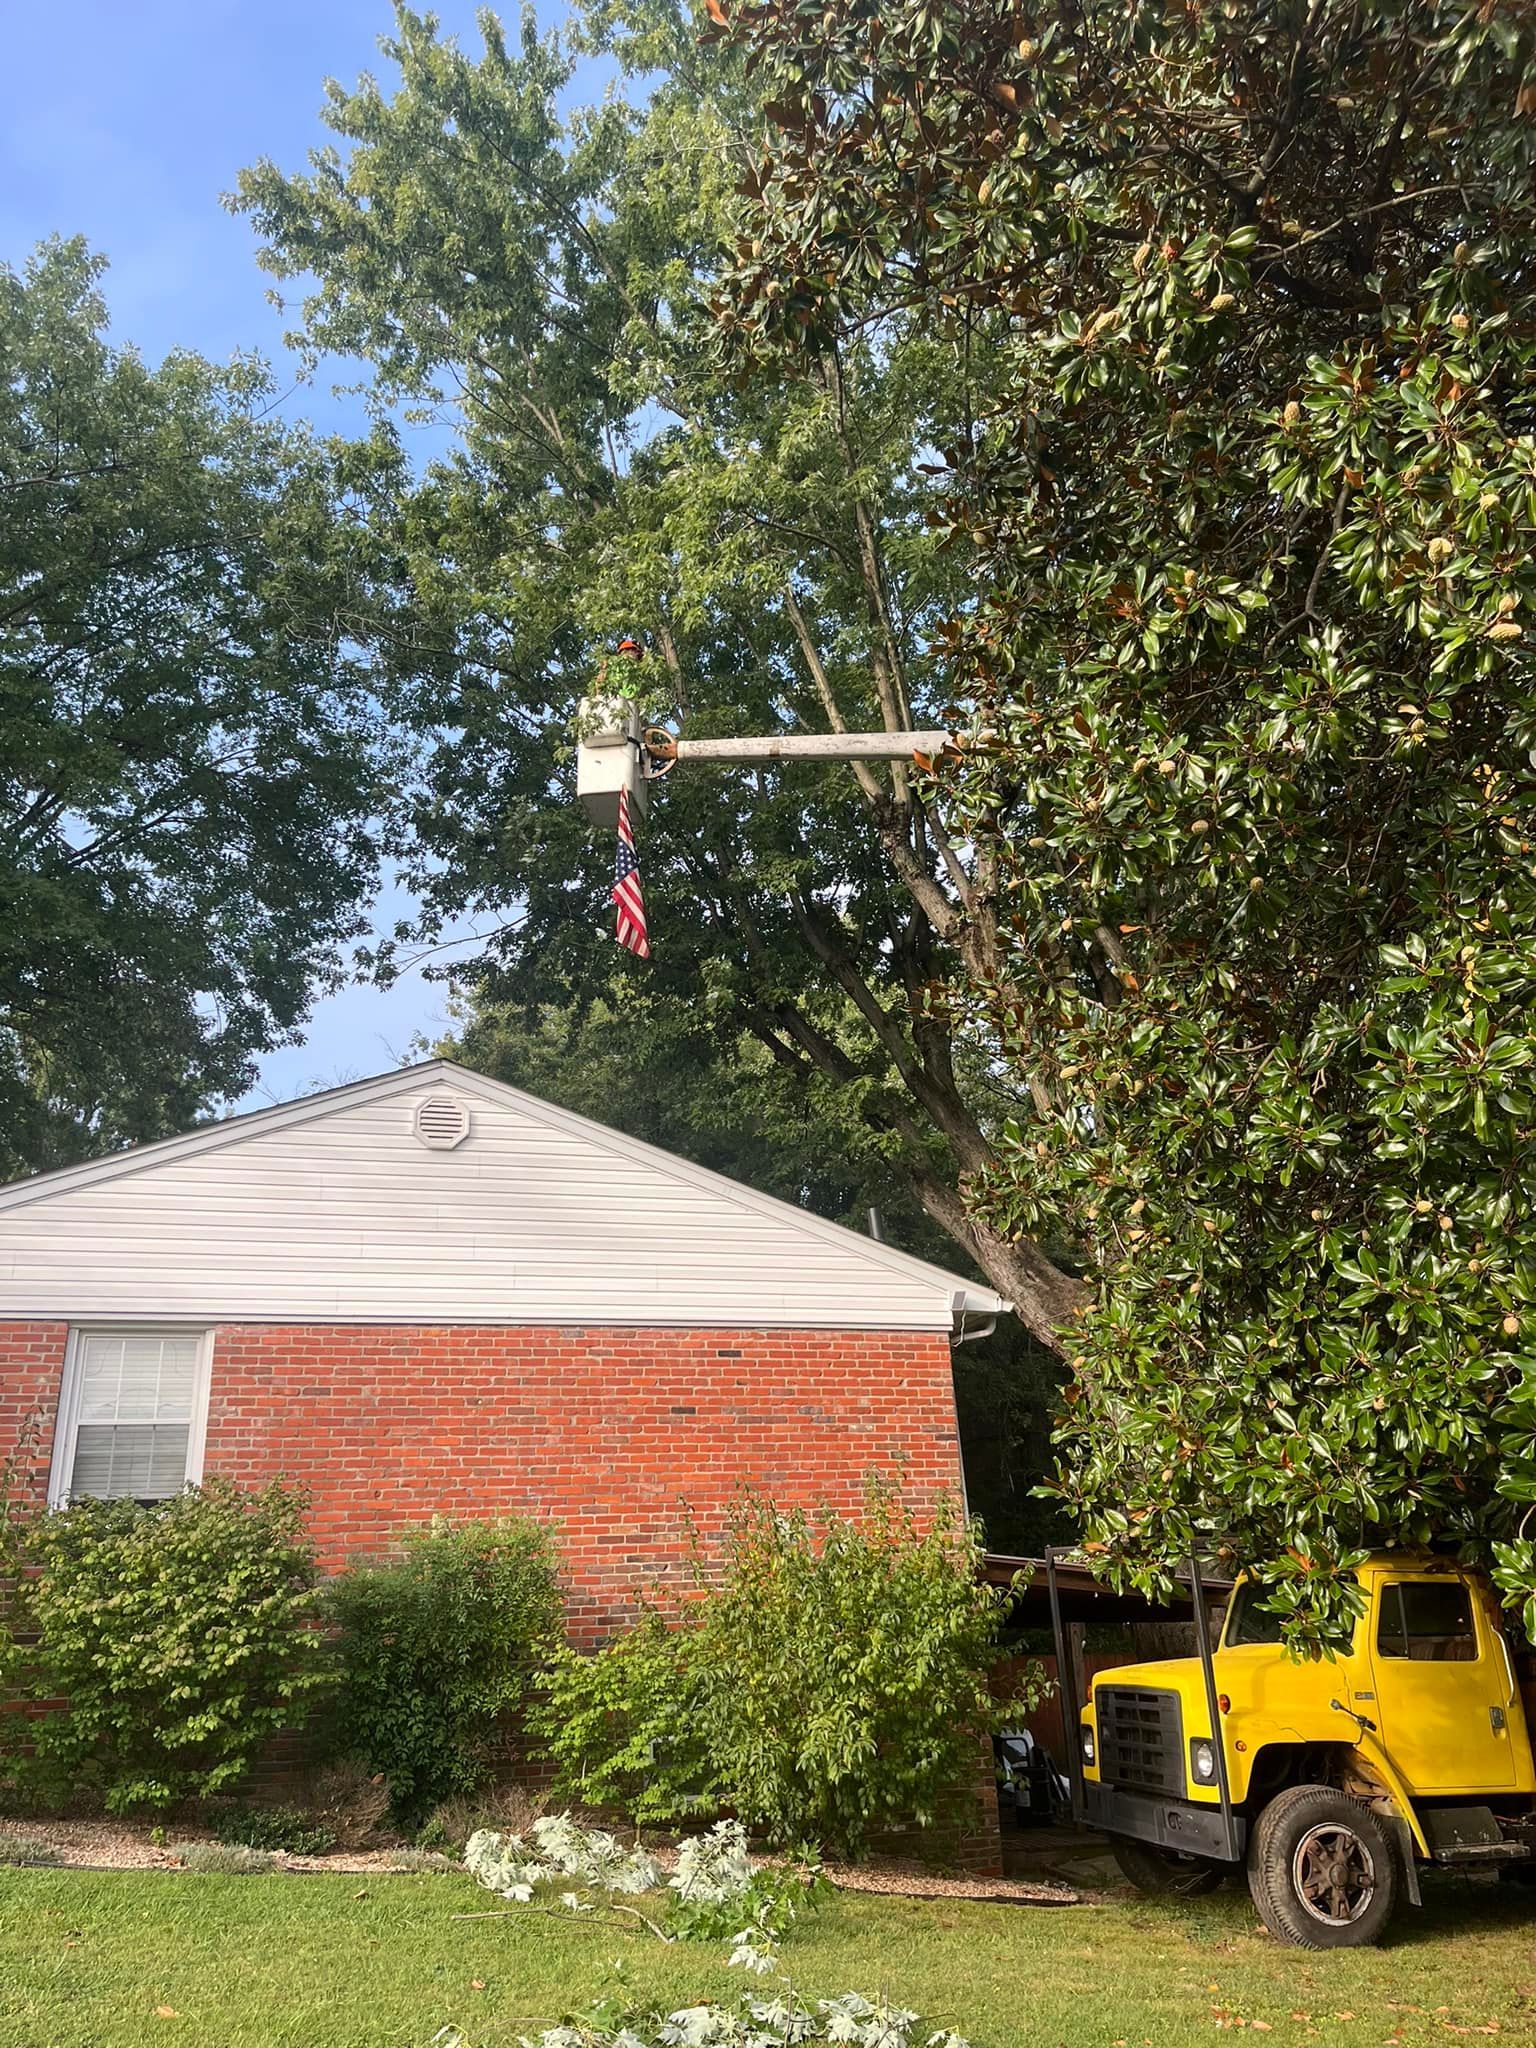 a yellow truck is cutting a tree in front of a brick house .